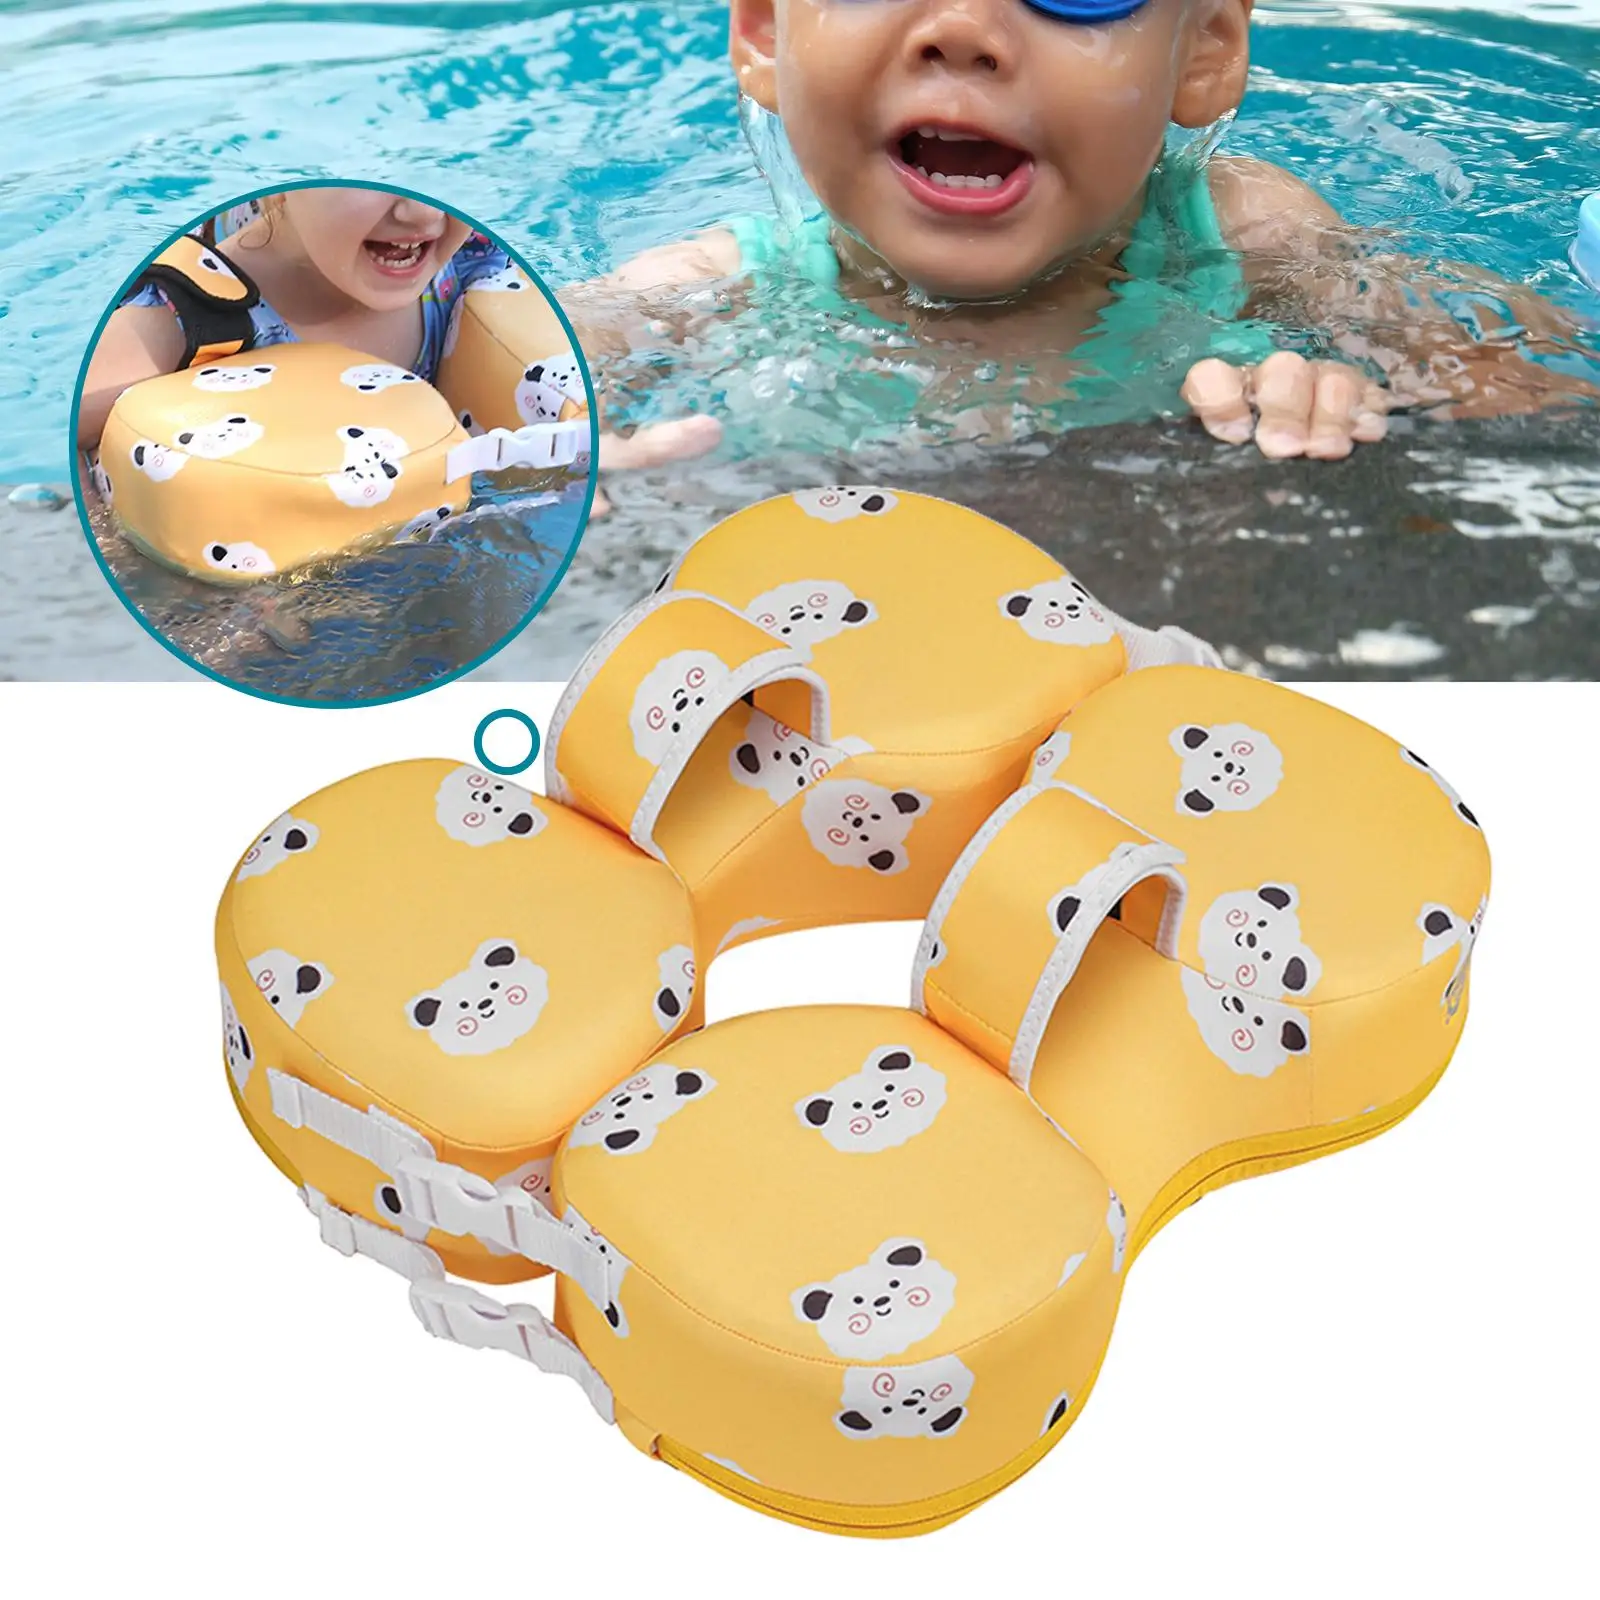 Within 5 Years Old Swim Trainer for Toddlers Newborn Kids